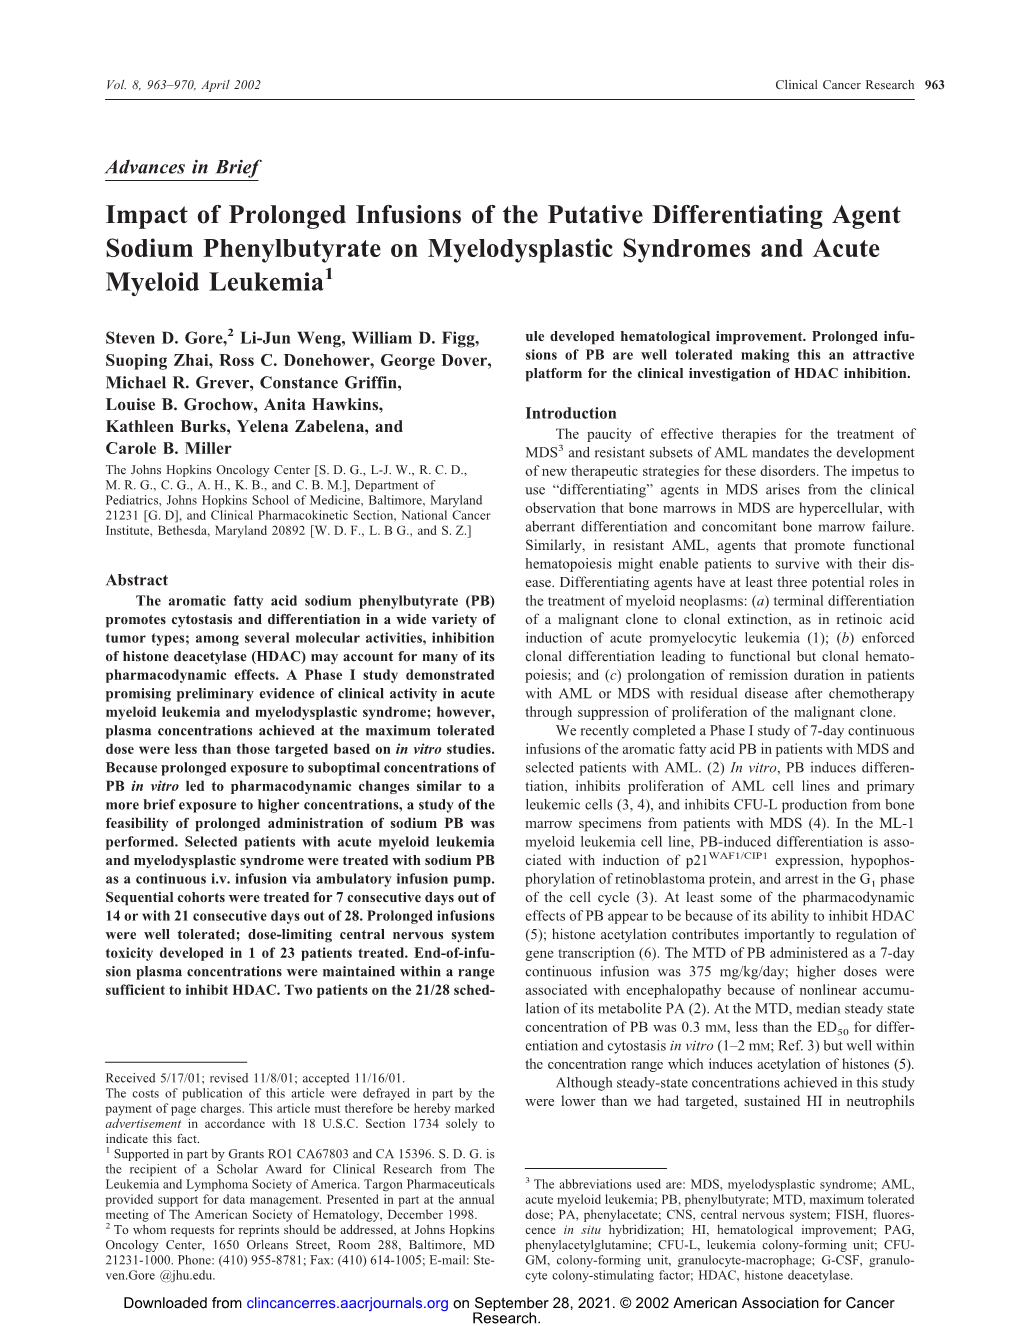 Impact of Prolonged Infusions of the Putative Differentiating Agent Sodium Phenylbutyrate on Myelodysplastic Syndromes and Acute Myeloid Leukemia1